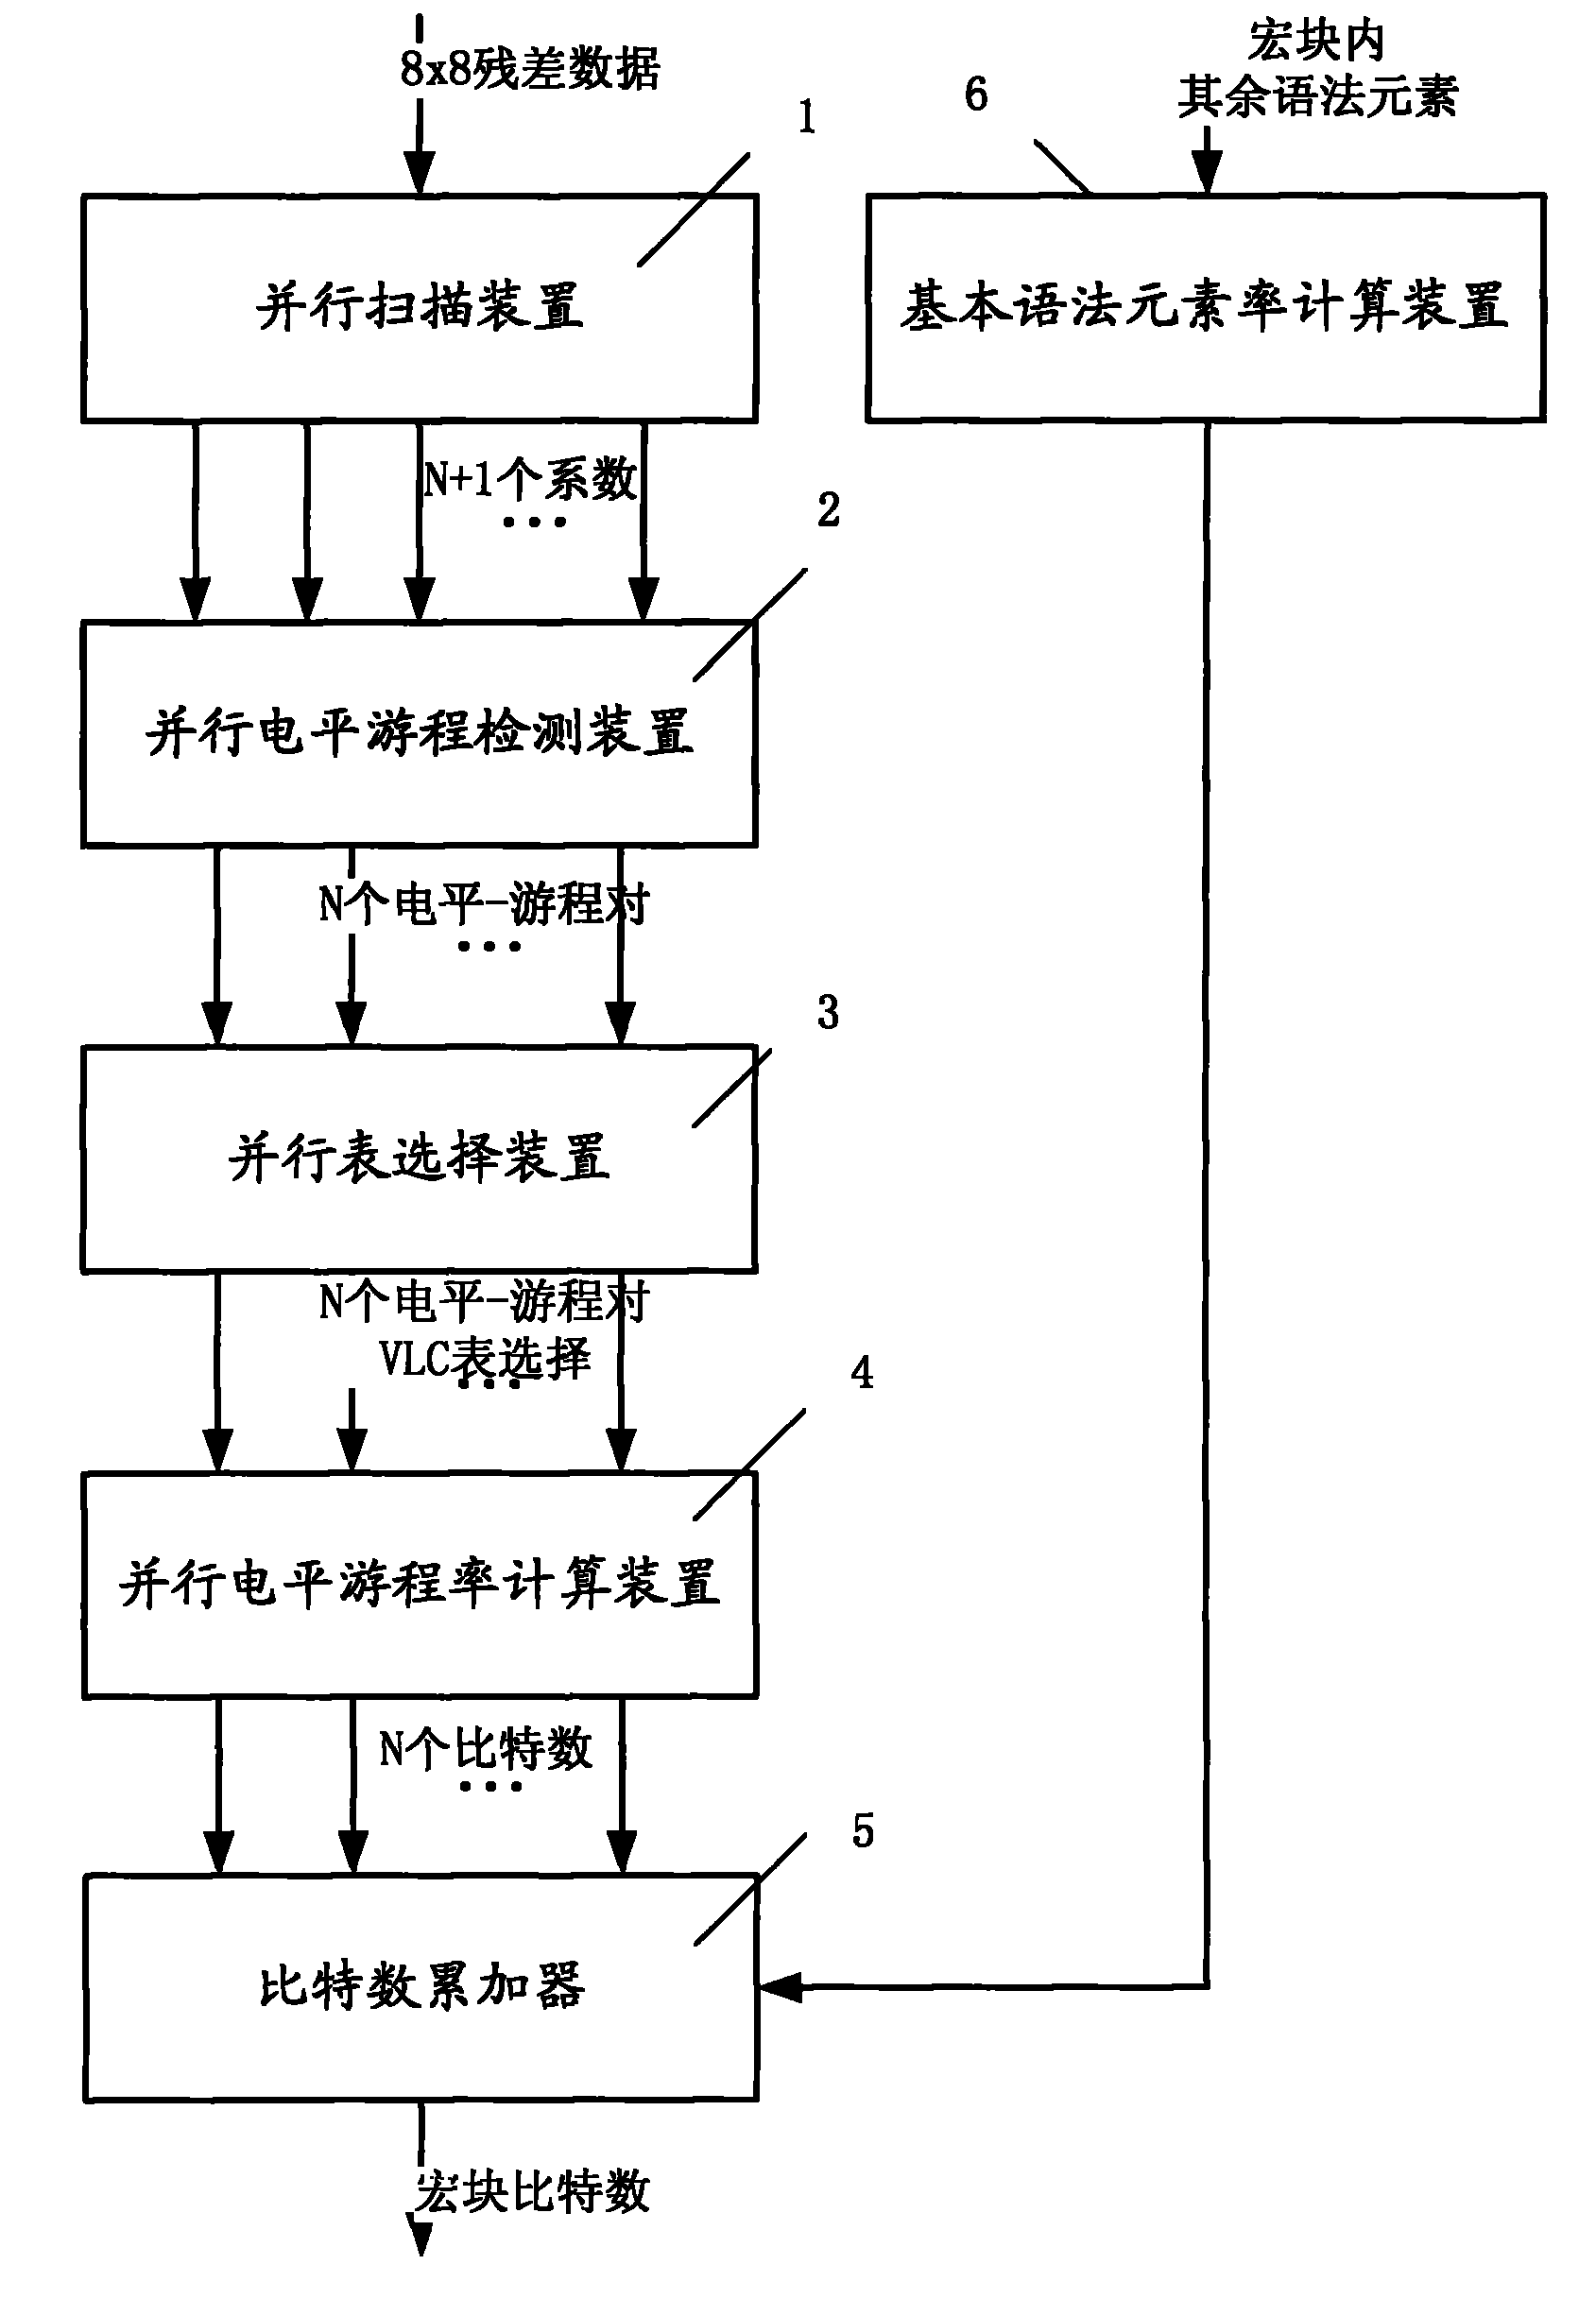 Fast advanced video encoding rate computing method and apparatus thereof